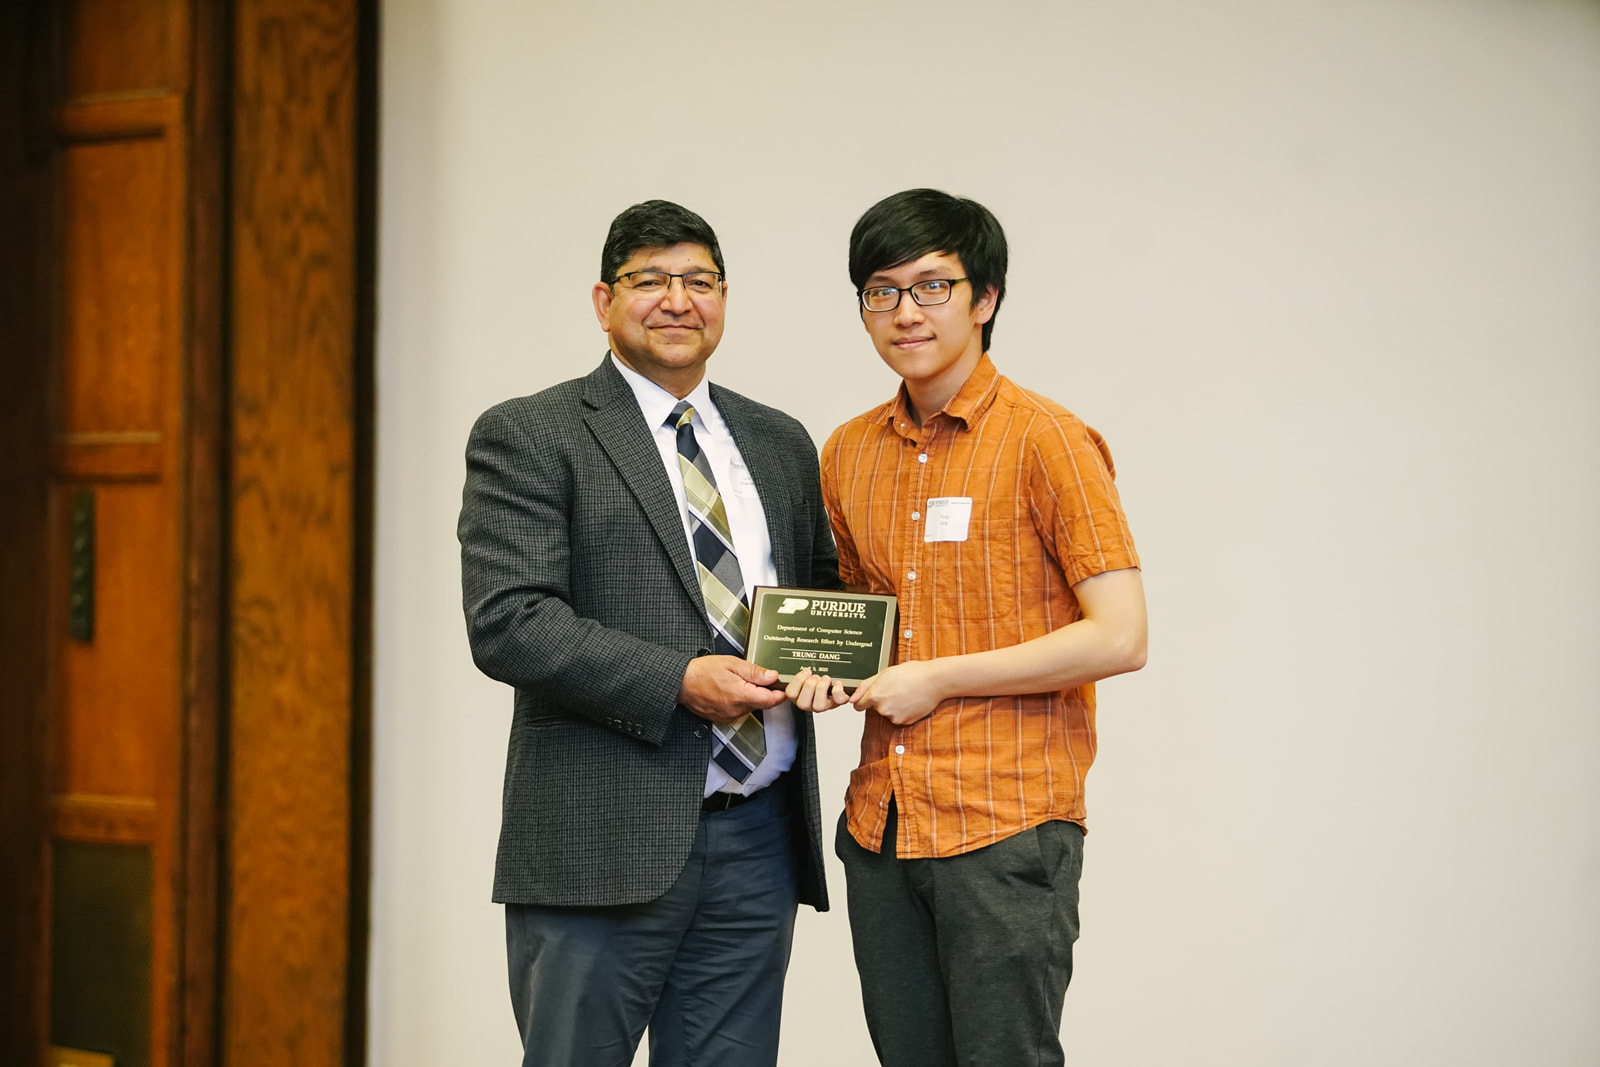 Trung Dang won the Outstanding Research Effort by an Undergraduate Student